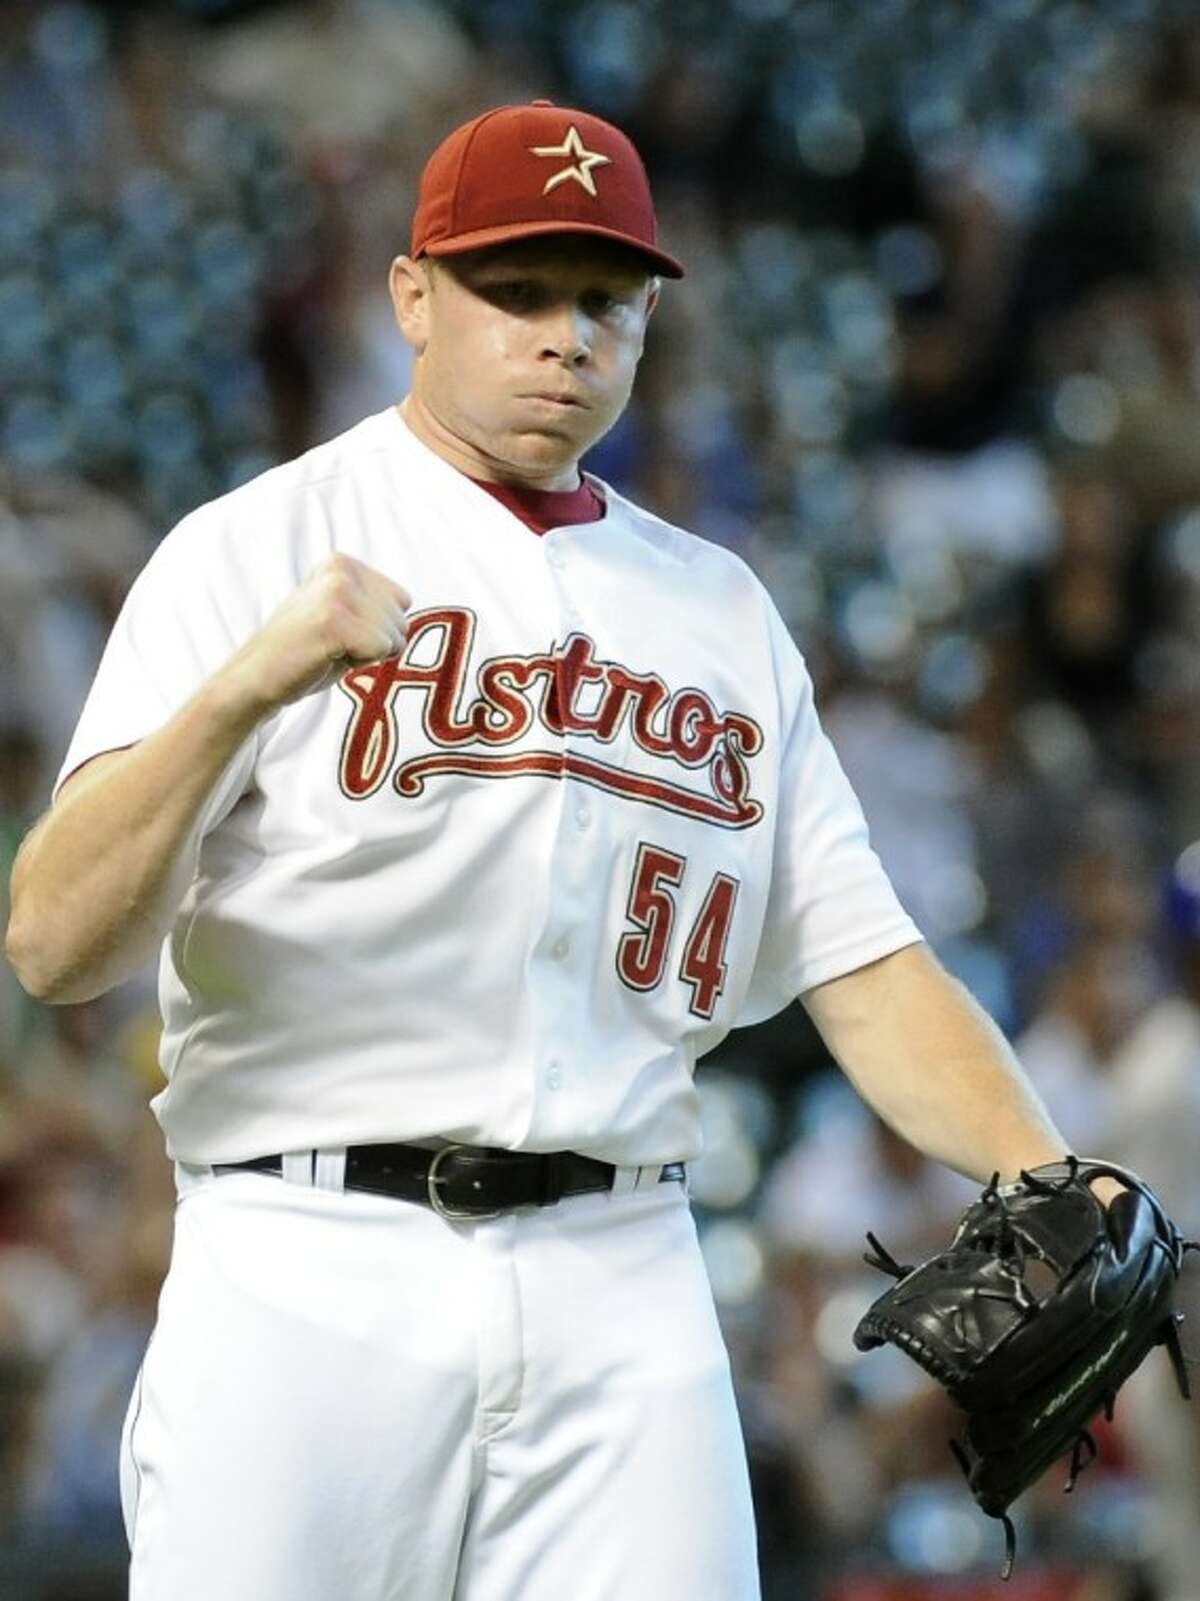 Houston Astros closer Mark Melancon reacts to the last out of the ninth inning as the Astros beat the Chicago Cubs 4-3 on Wednesday in Houston.